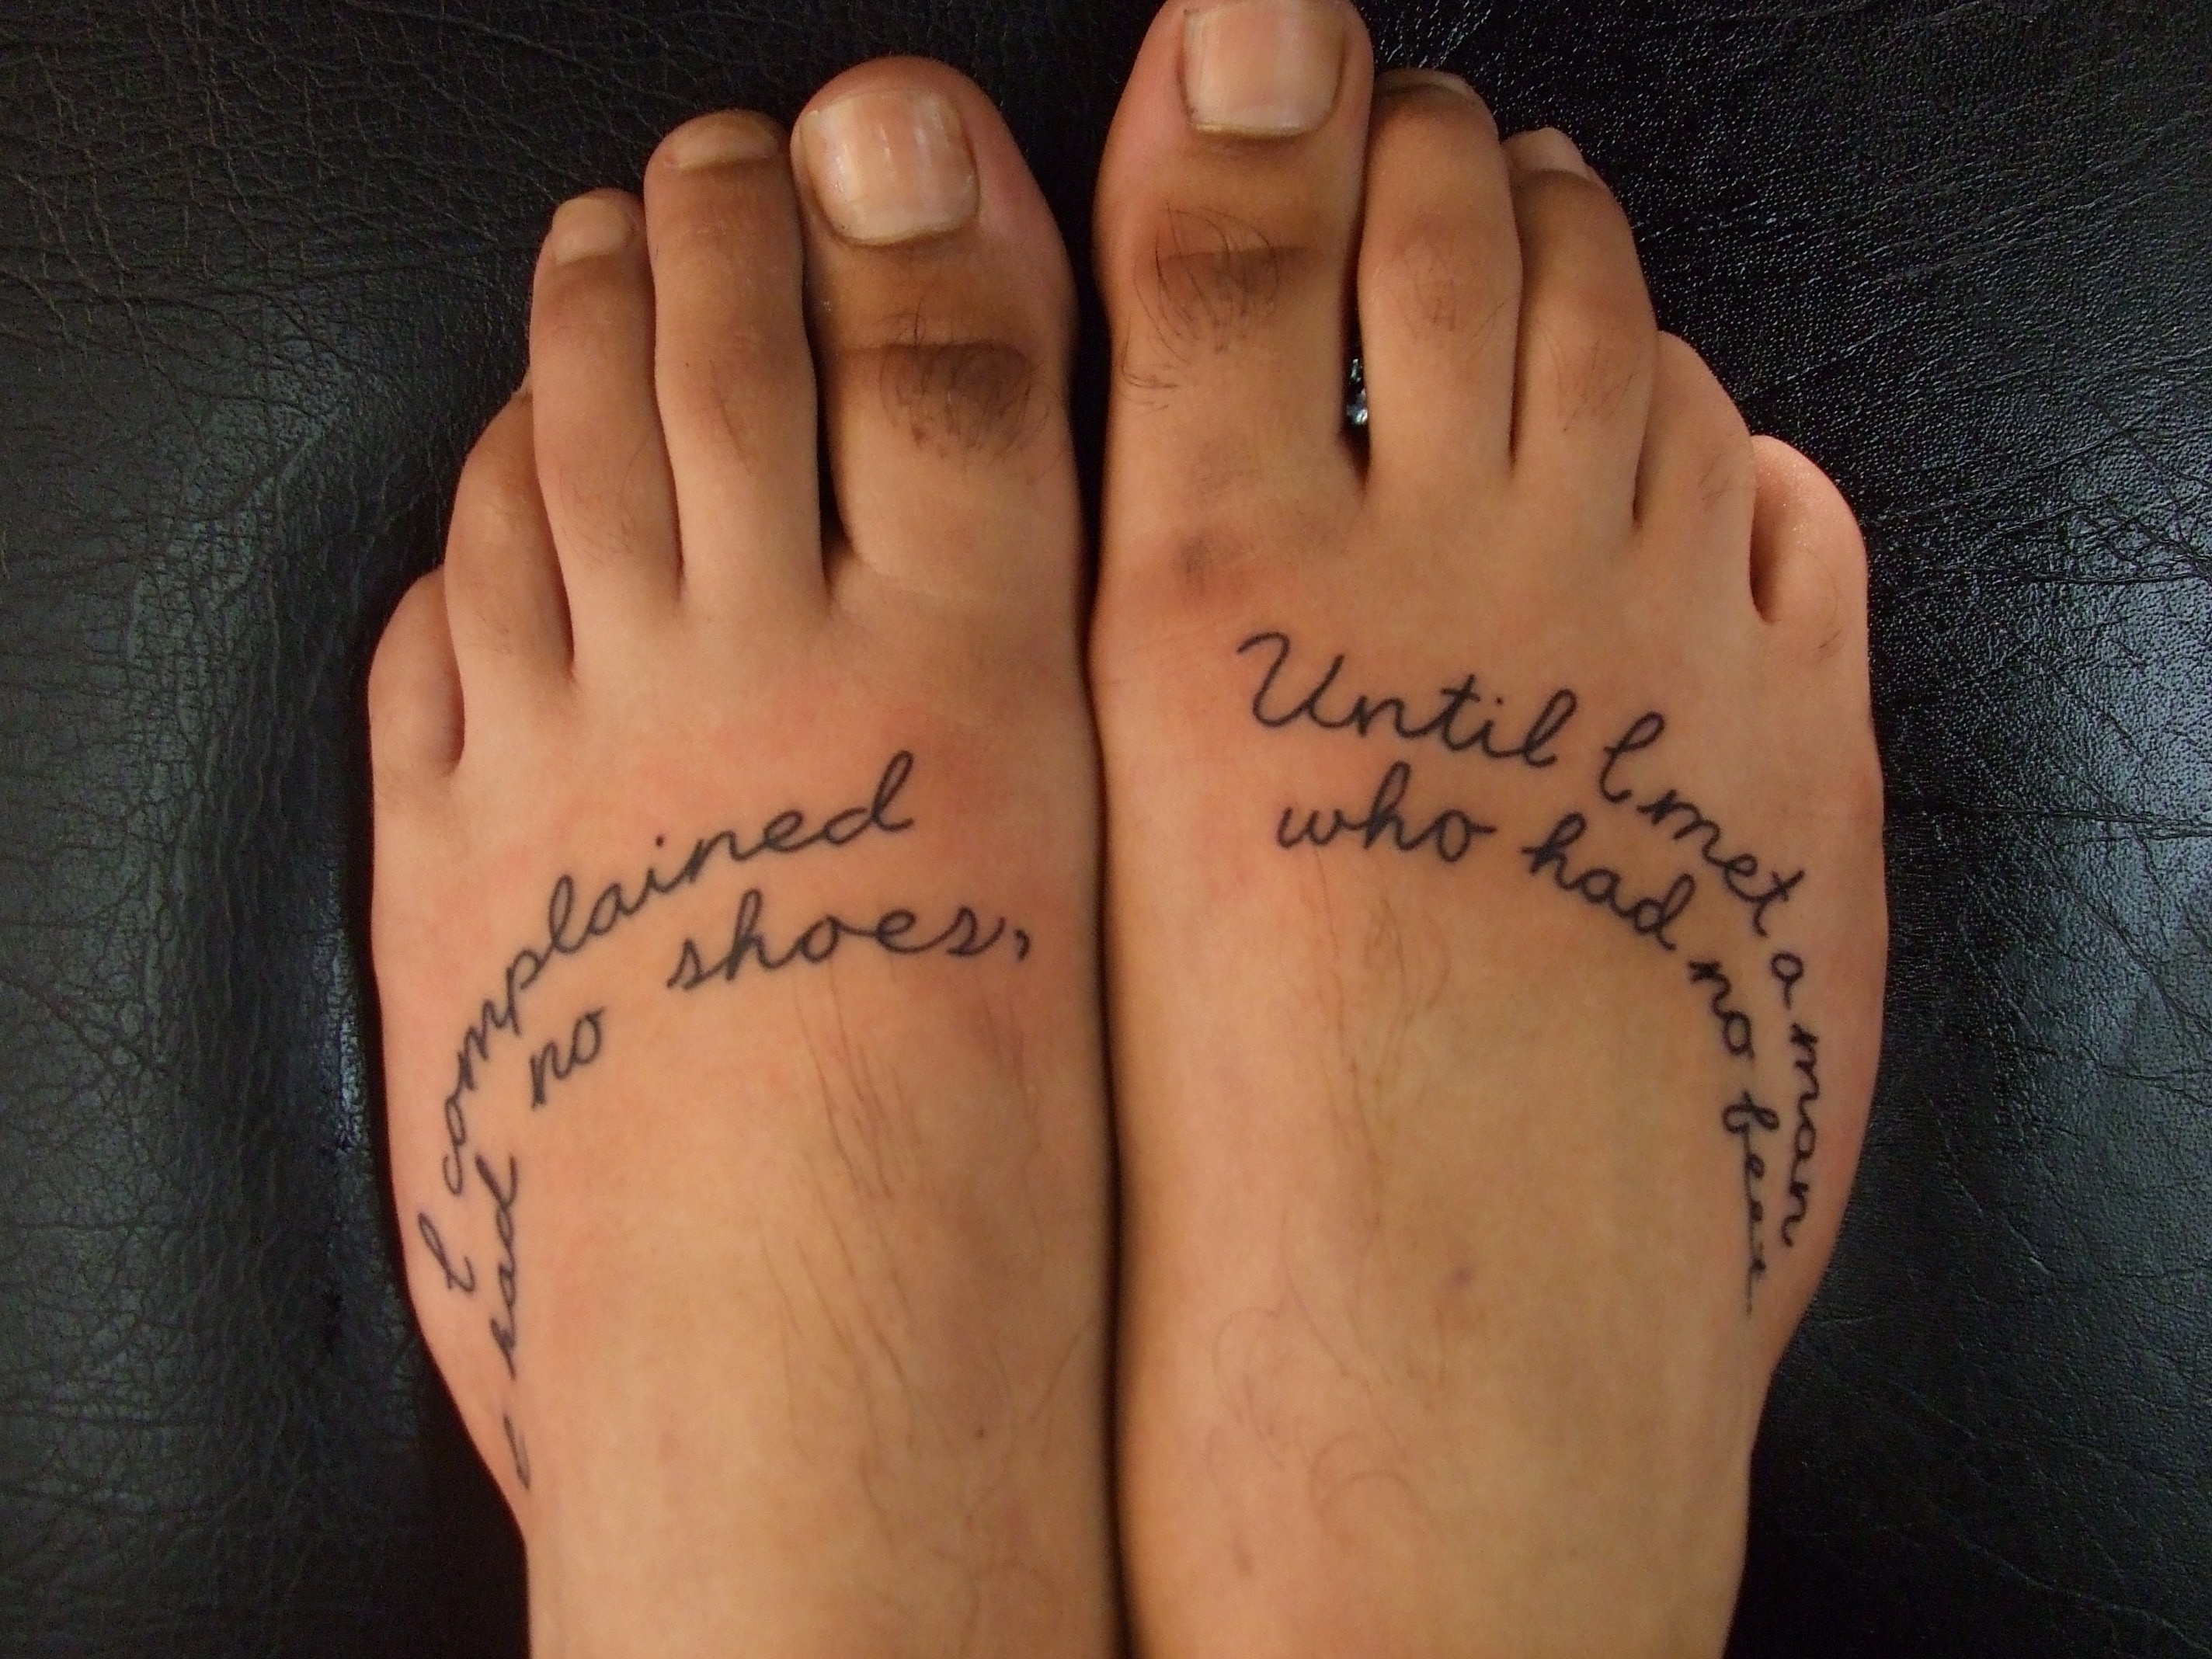  Quote Tattoos  Designs Ideas and Meaning Tattoos  For You